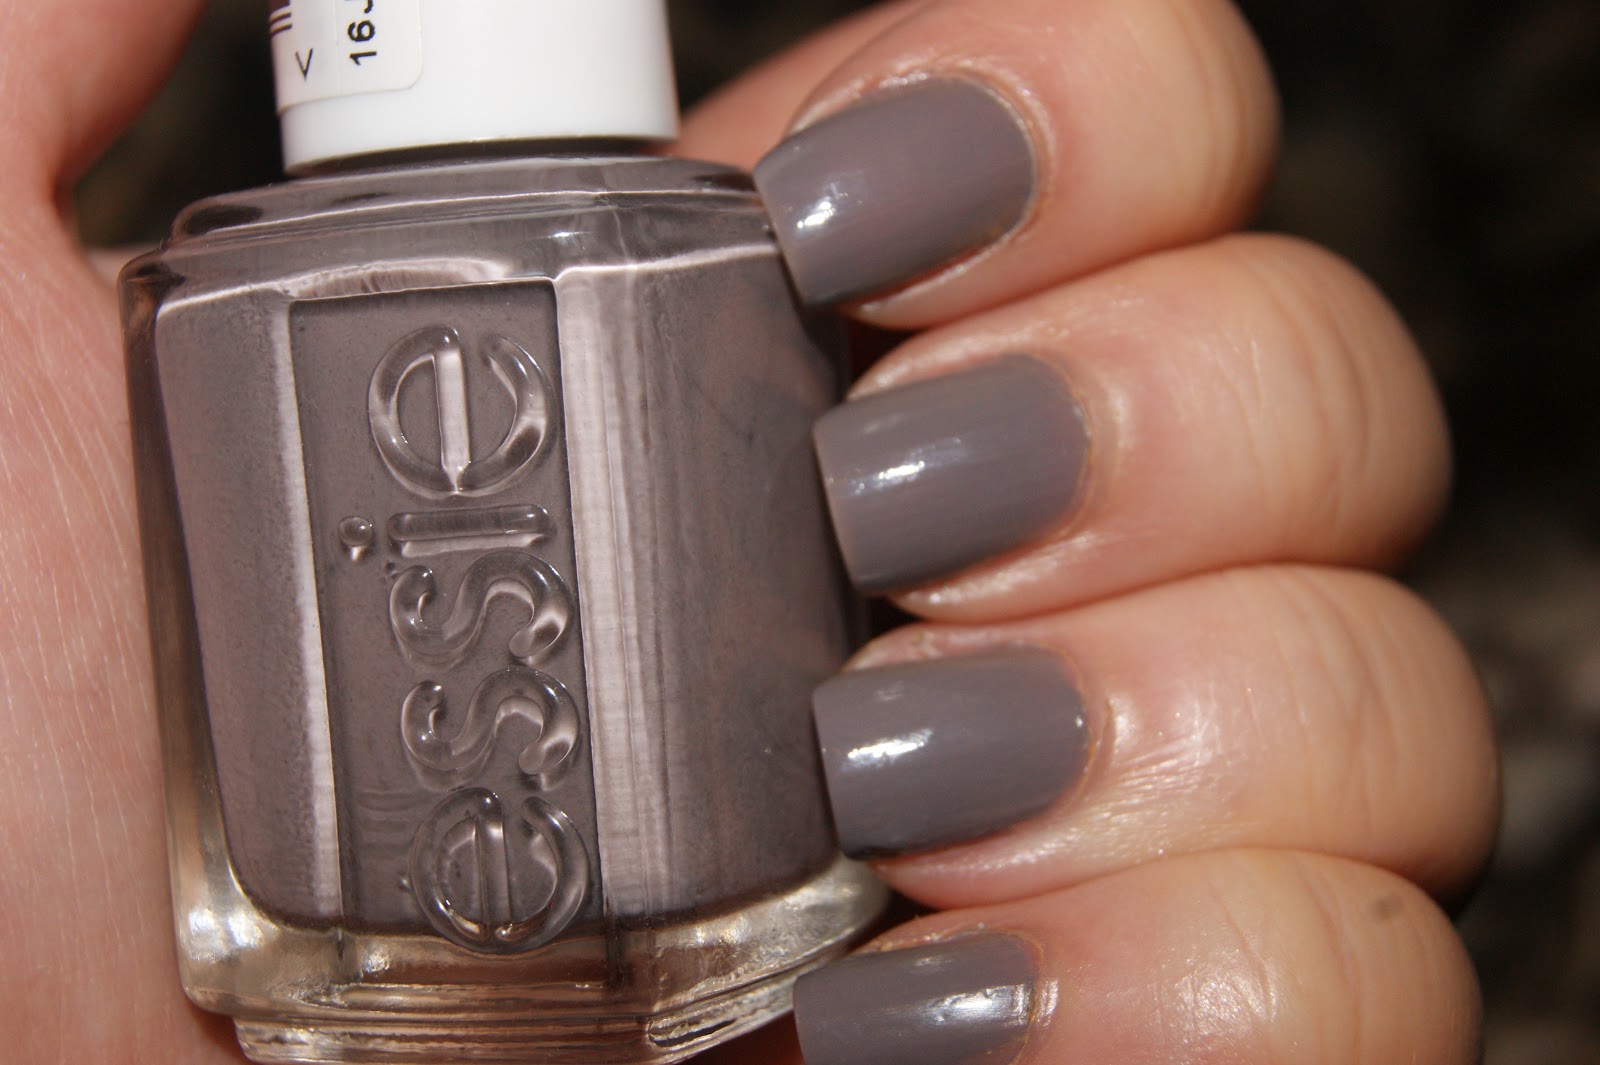 Essie Nail Polish in "Chinchilly" - wide 2